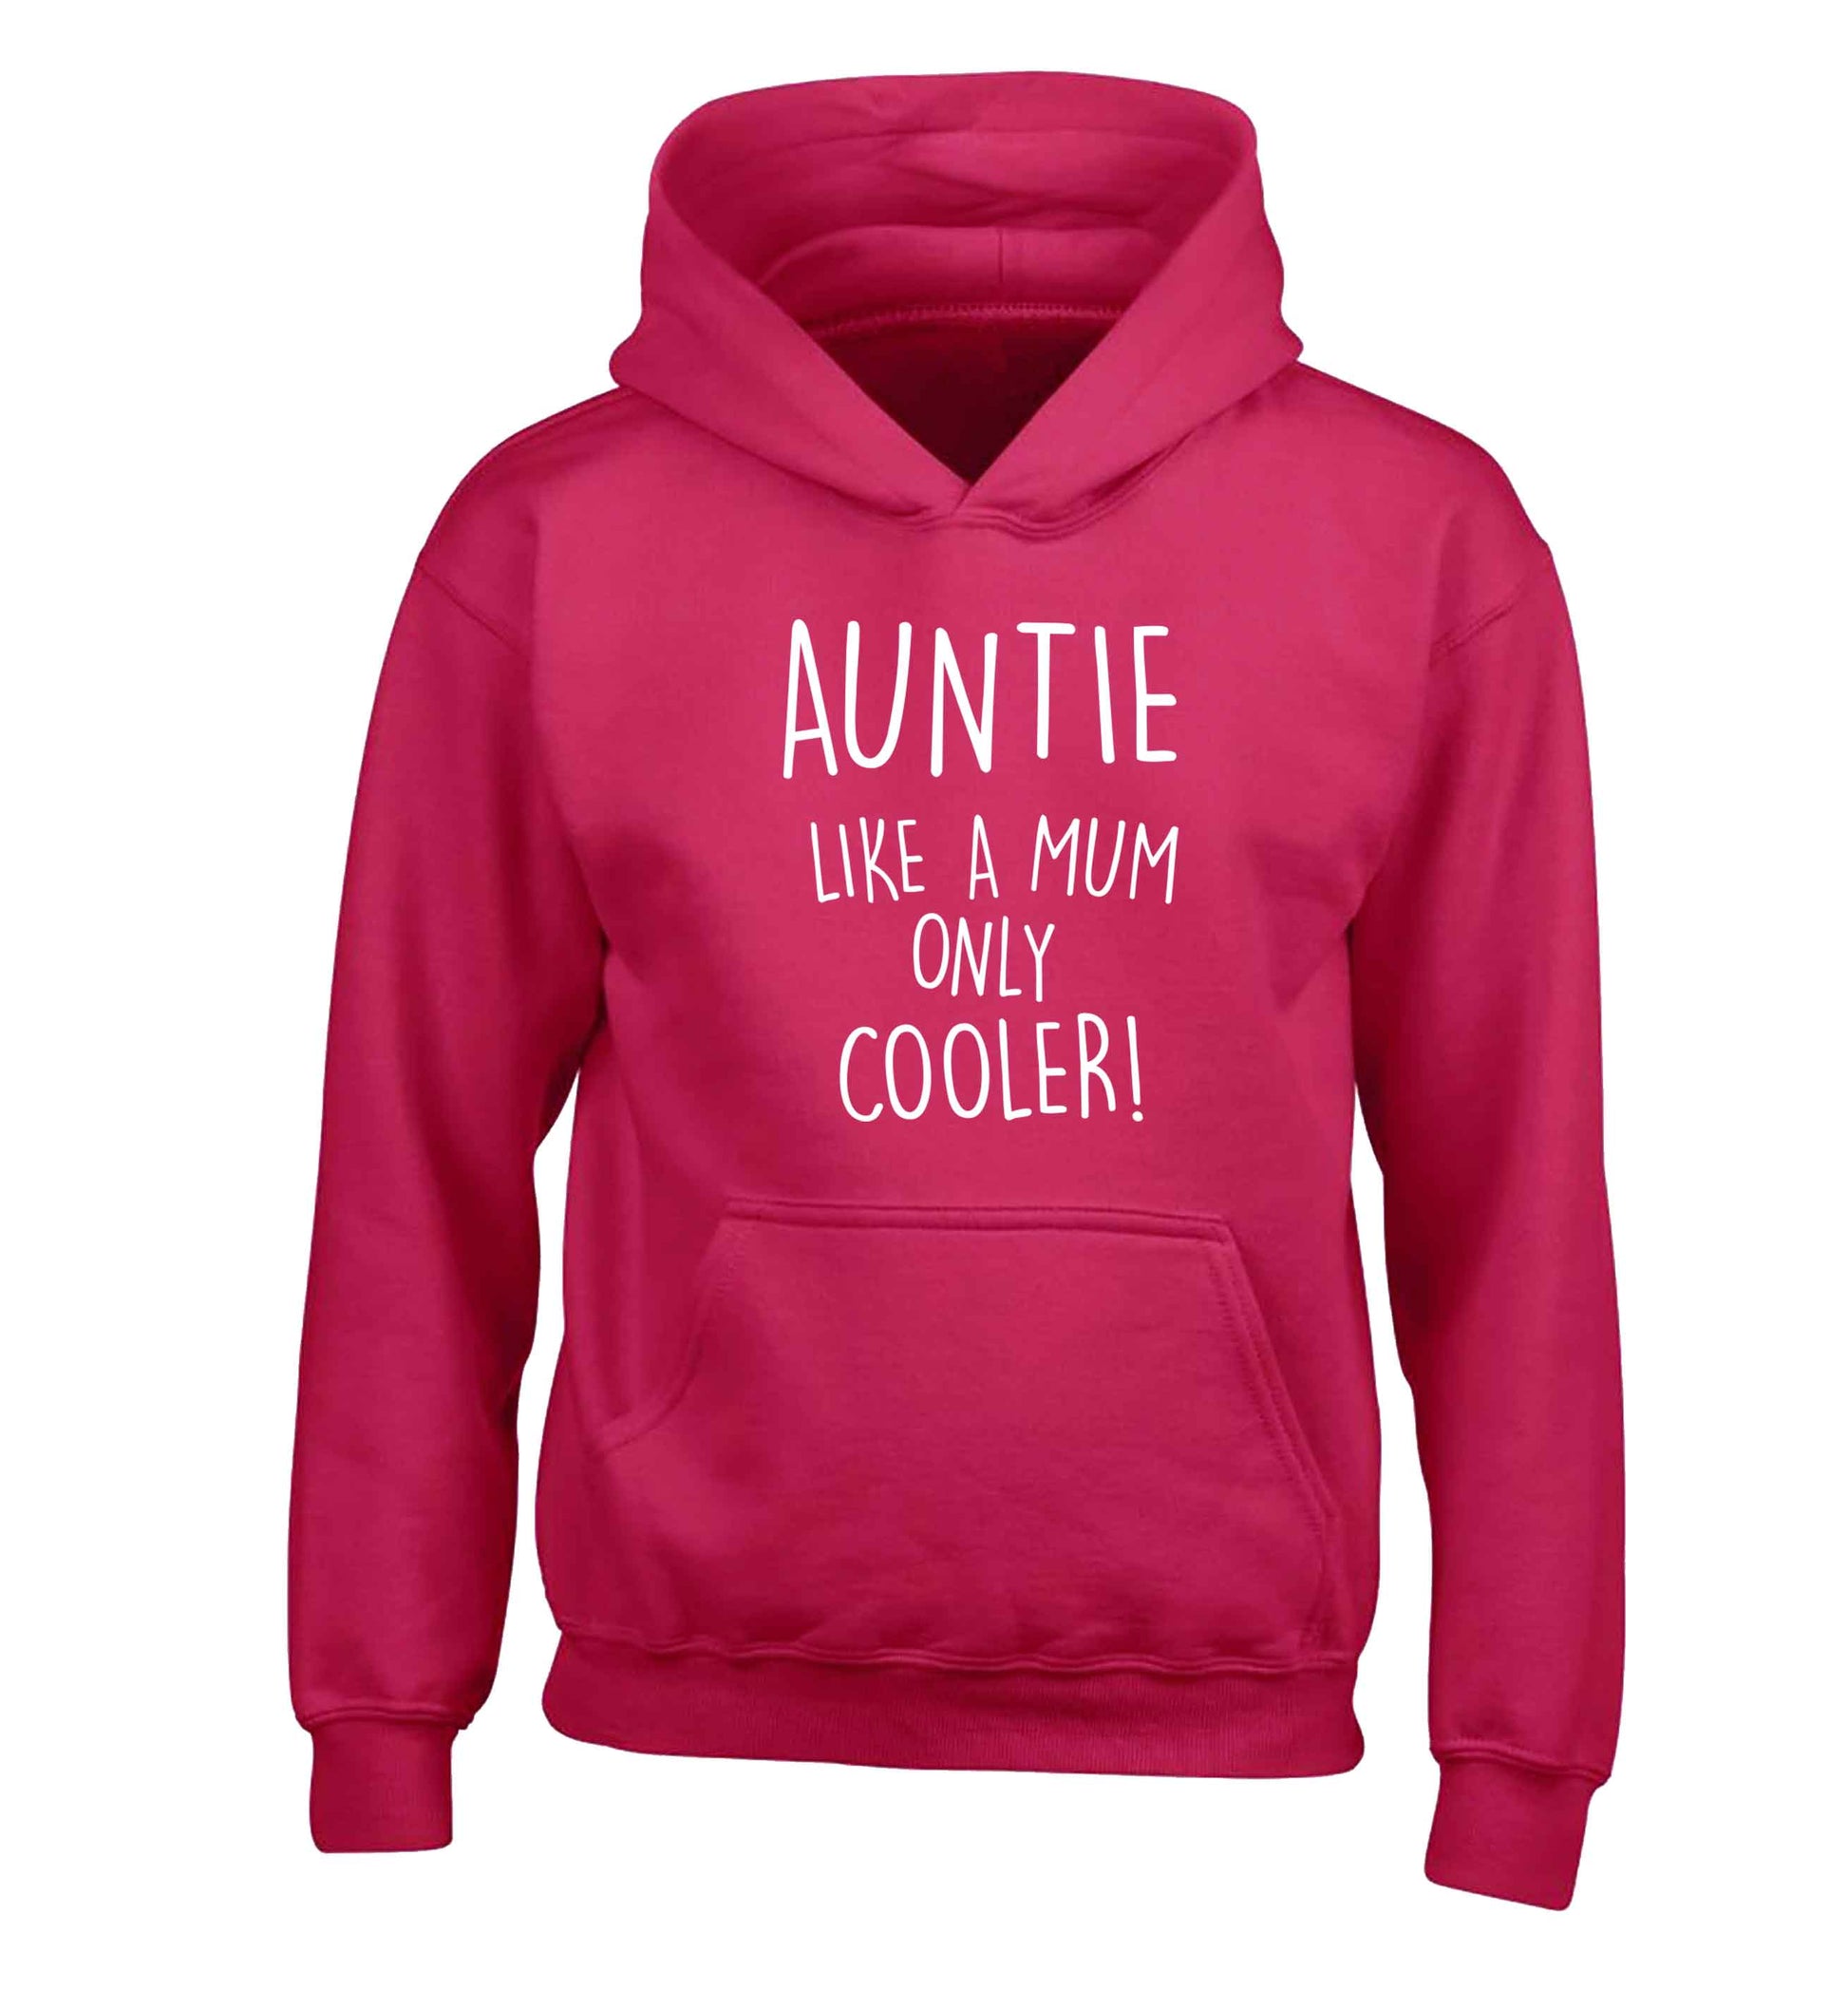 Auntie like a mum only cooler children's pink hoodie 12-13 Years